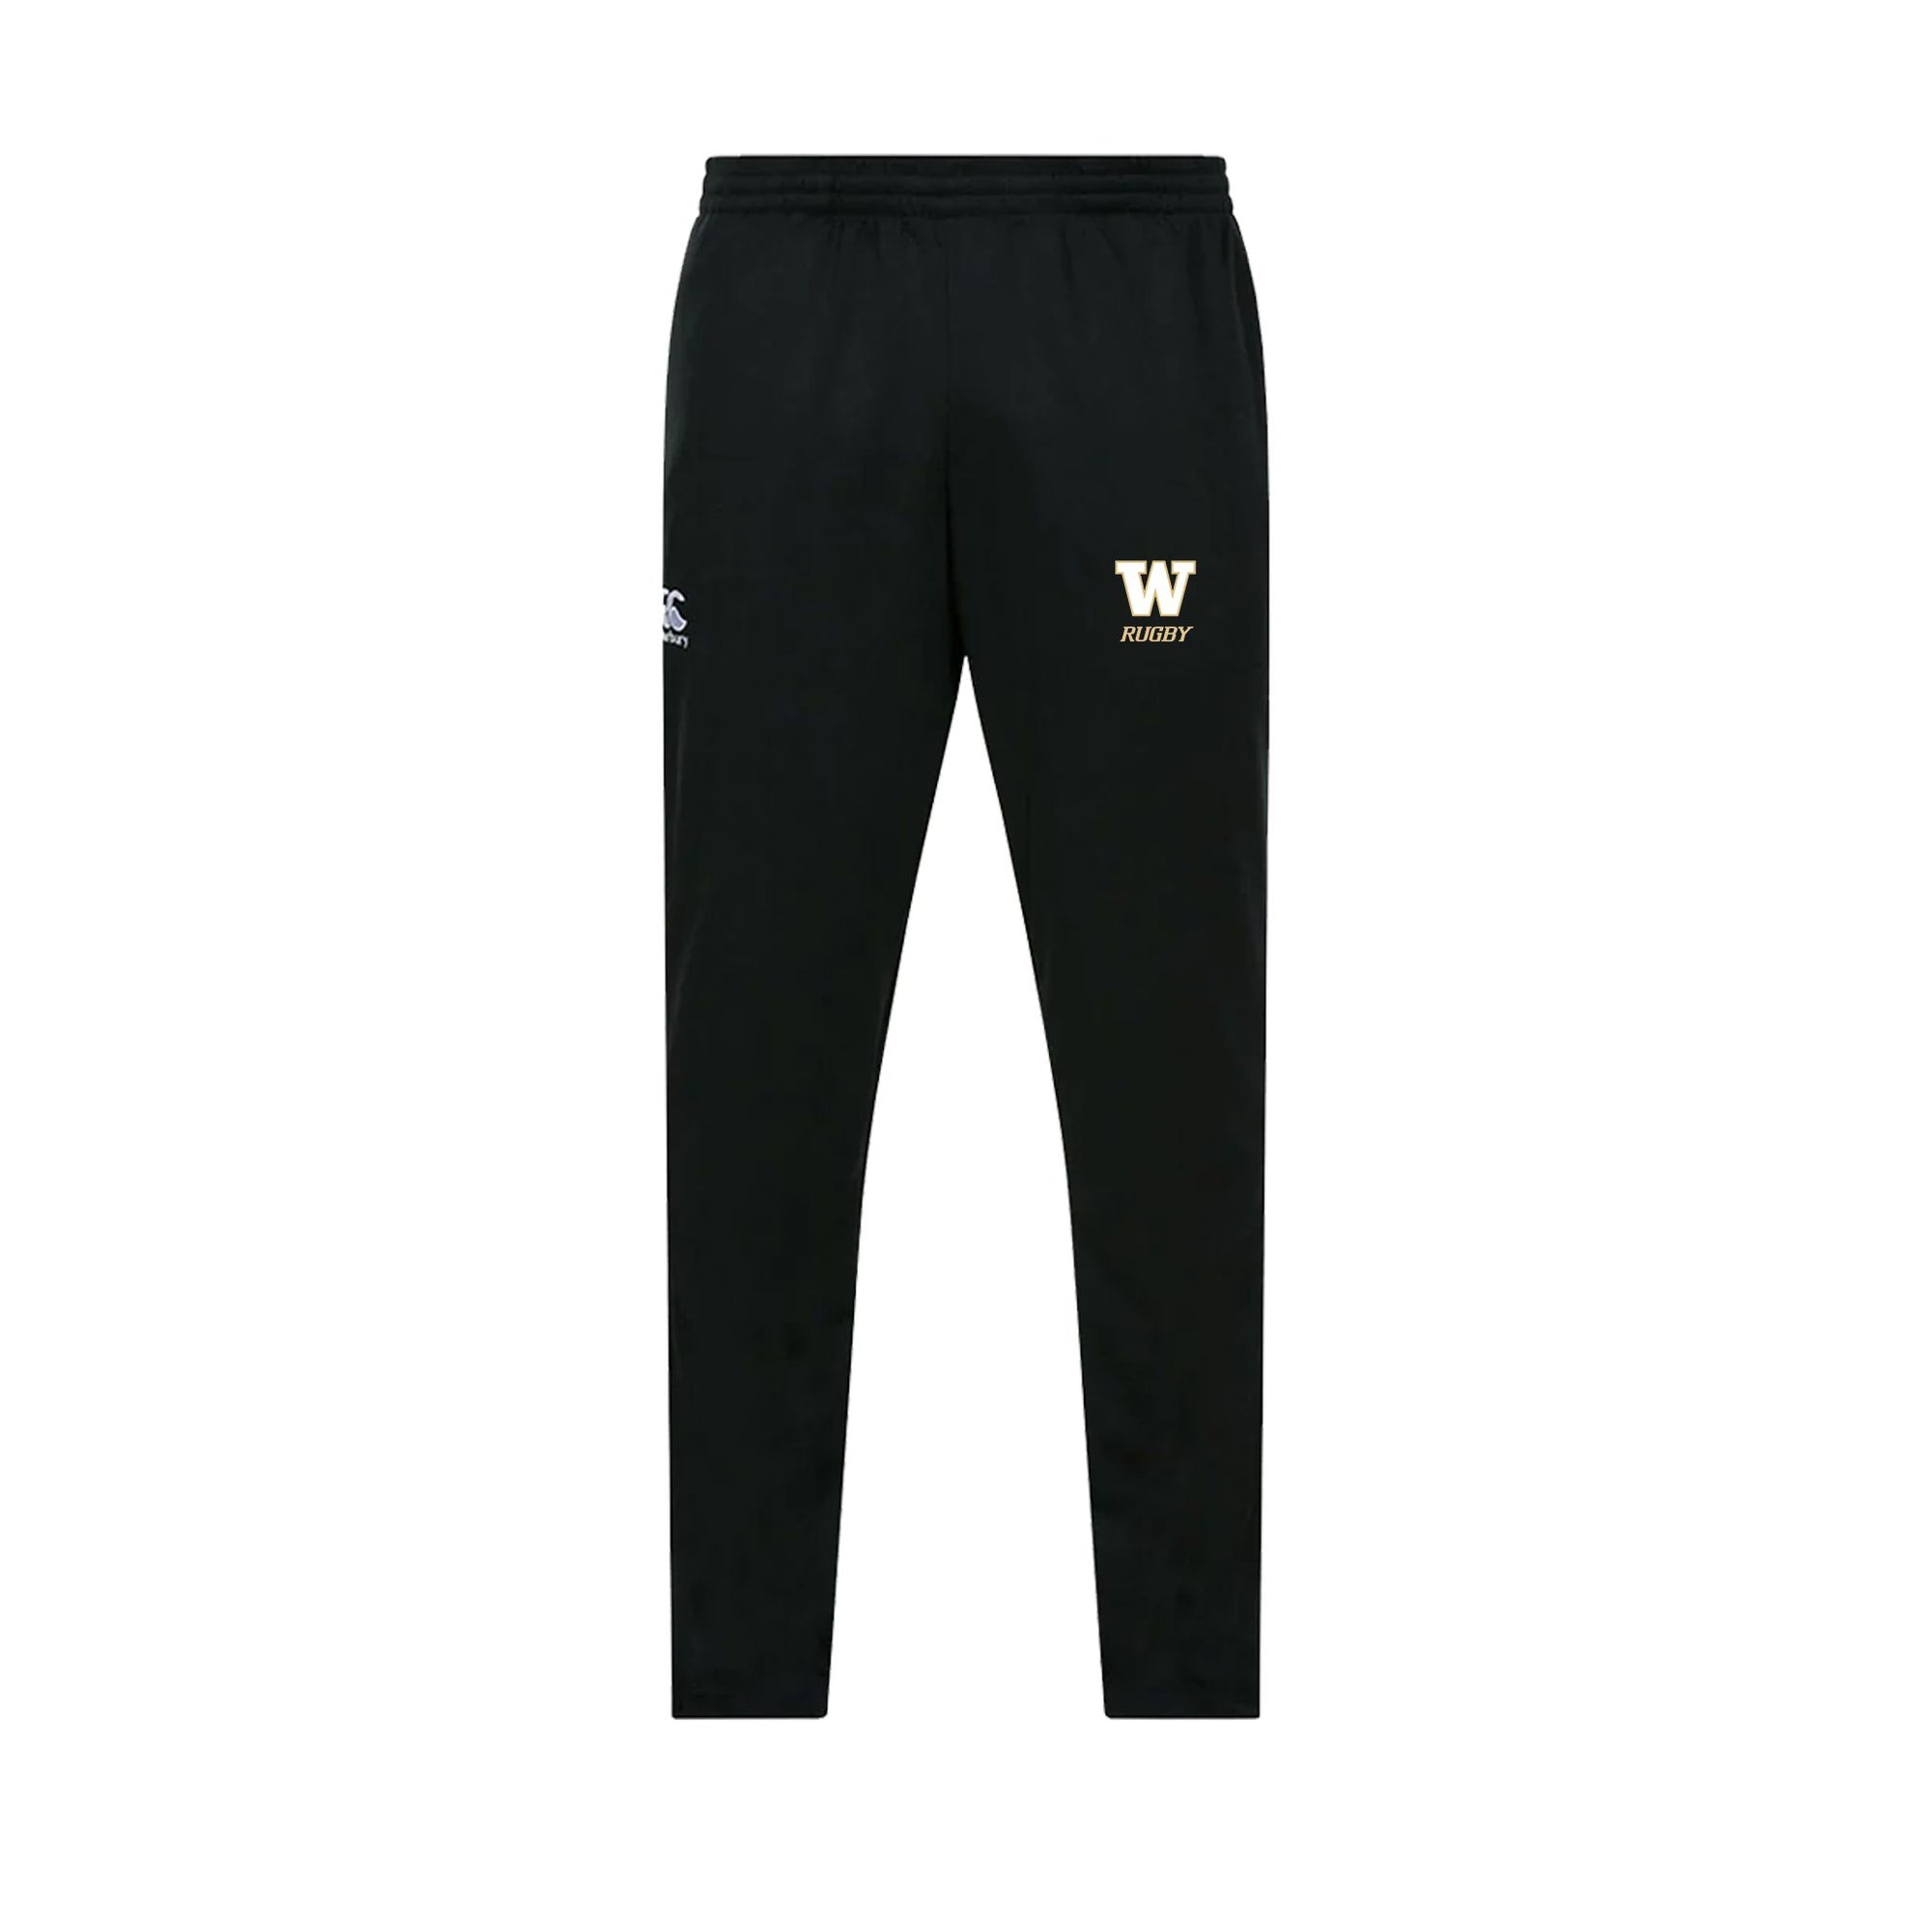 UW Women's Huskies Rugby Club Canterbury Stretch Tapered Pants-Black - The Rugby Shop The Rugby Shop UNISEX / Navy / XS TRS Distribution Canada Track Pants UW Women's Huskies Rugby Club Canterbury Stretch Tapered Pants-Black